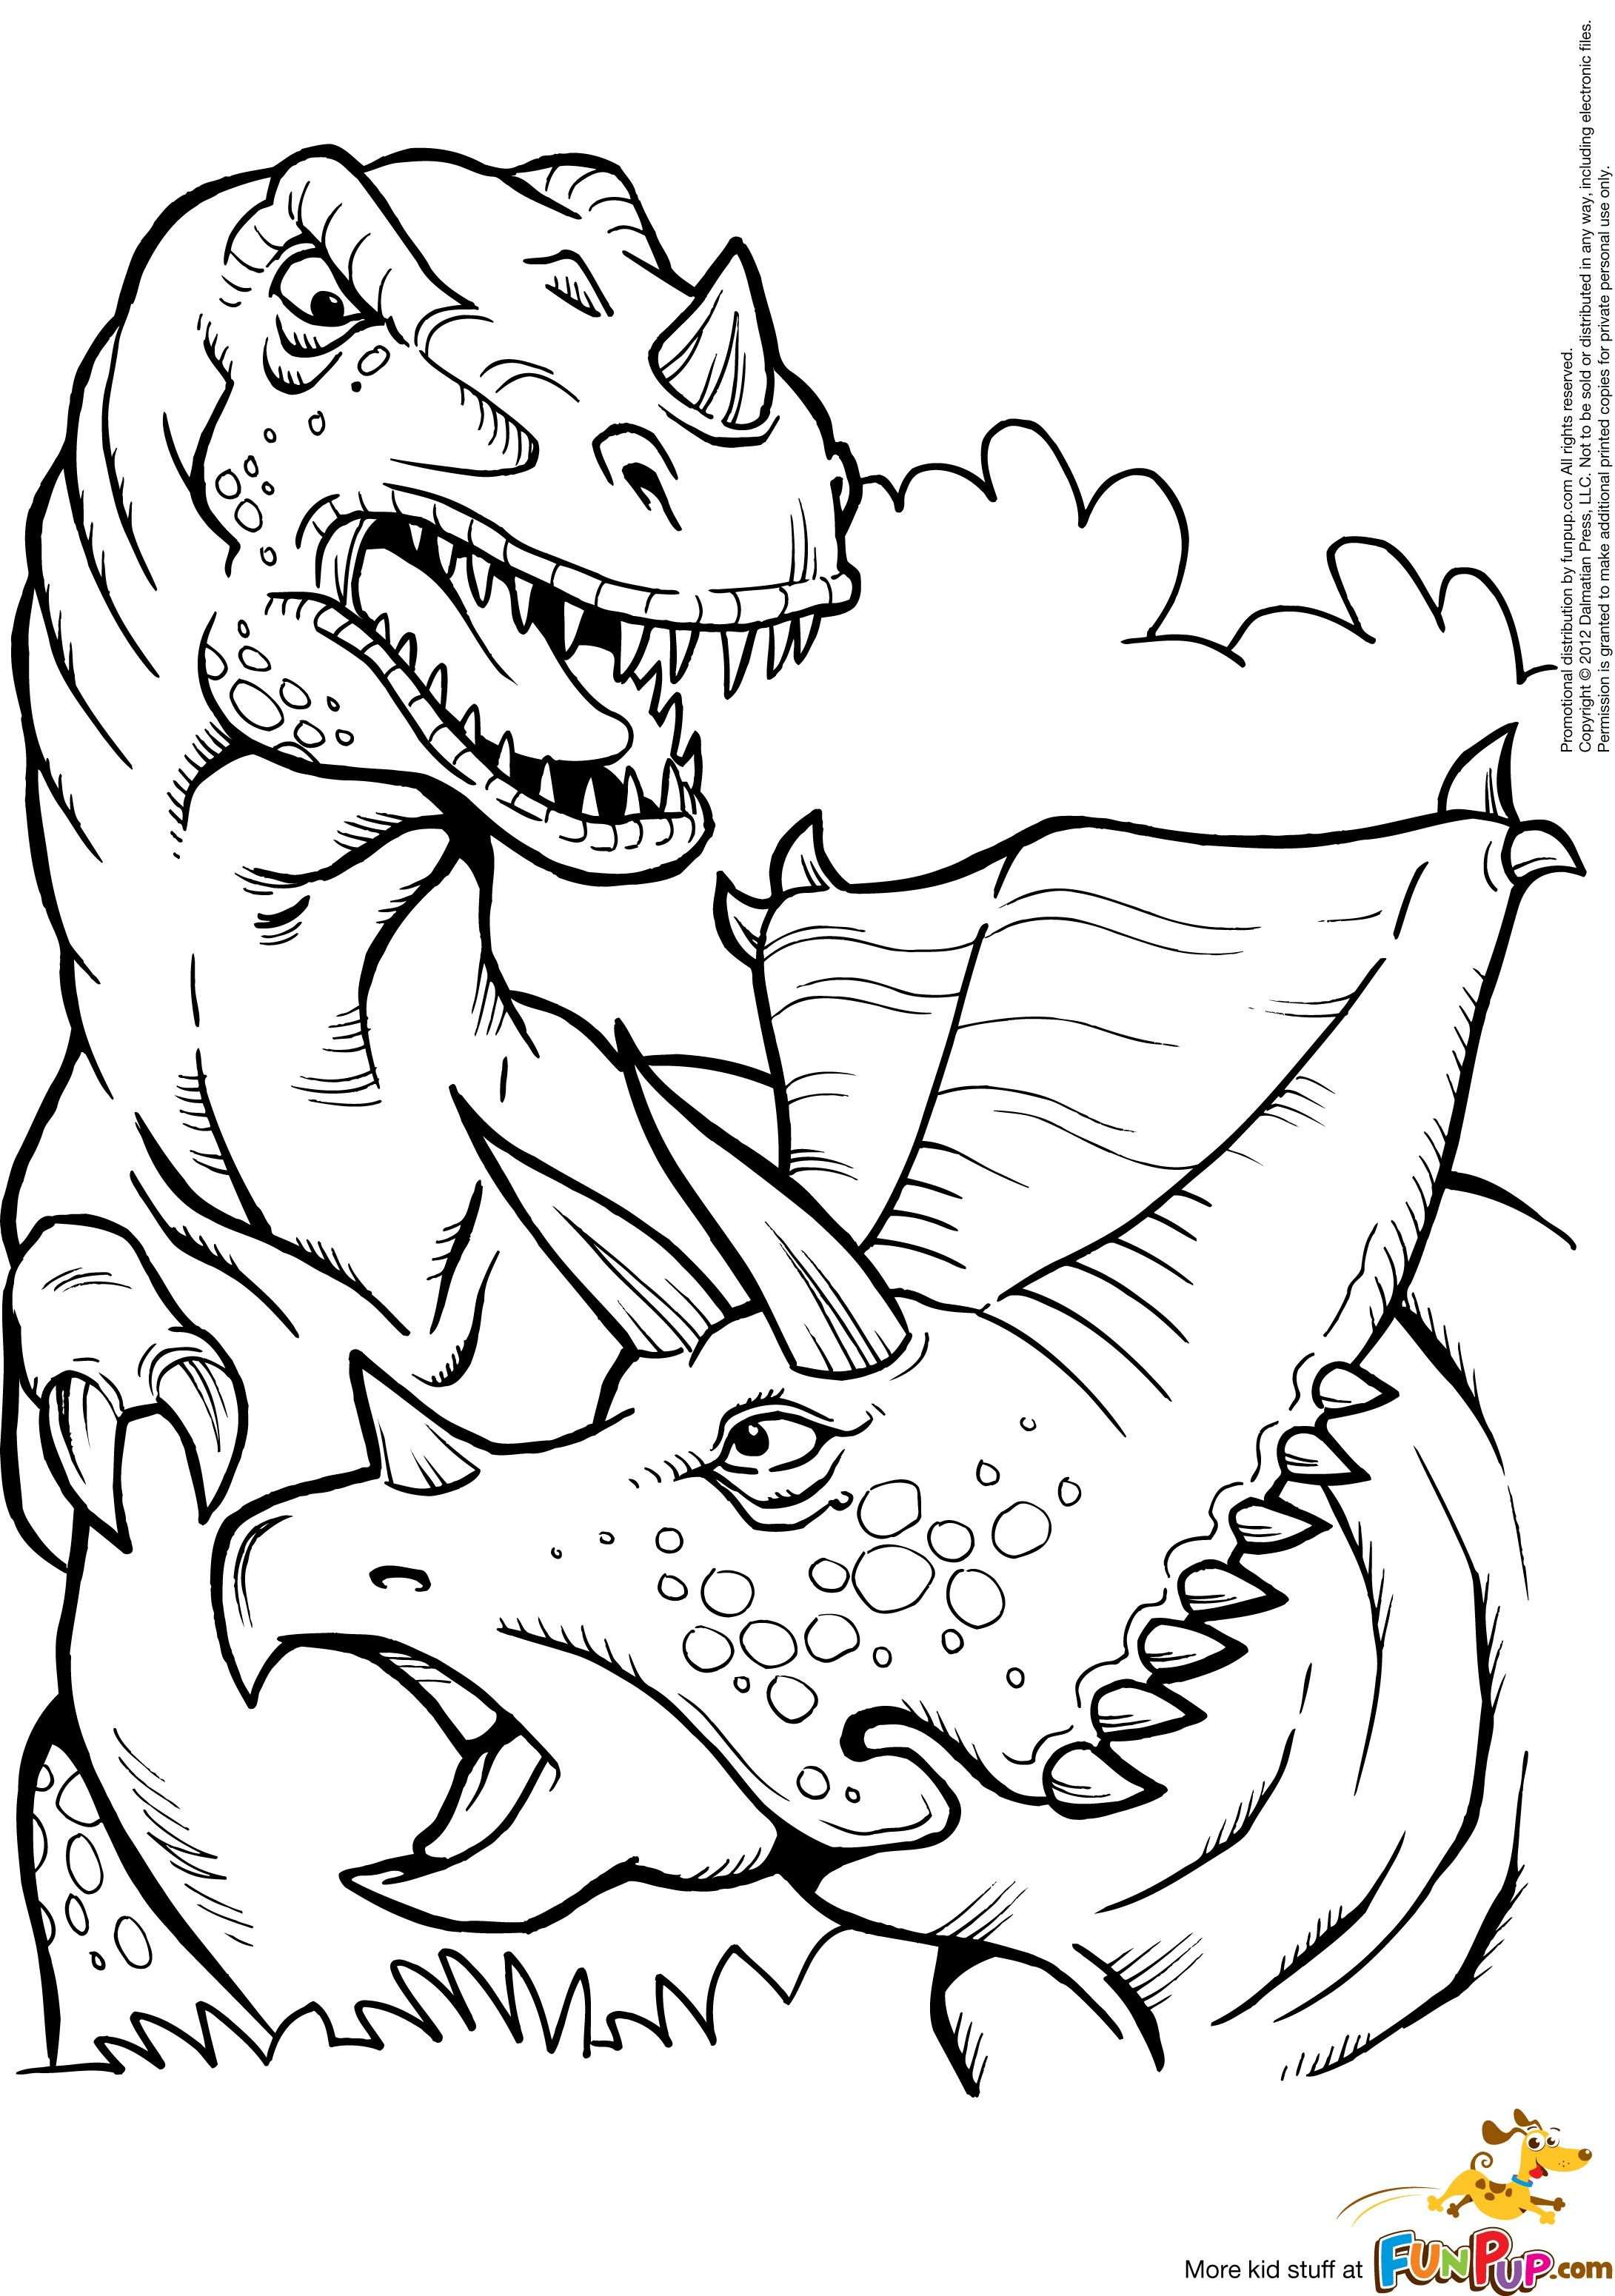 T Rex And Triceratops 0 00 Dinosaur Coloring Pages Dinosaur